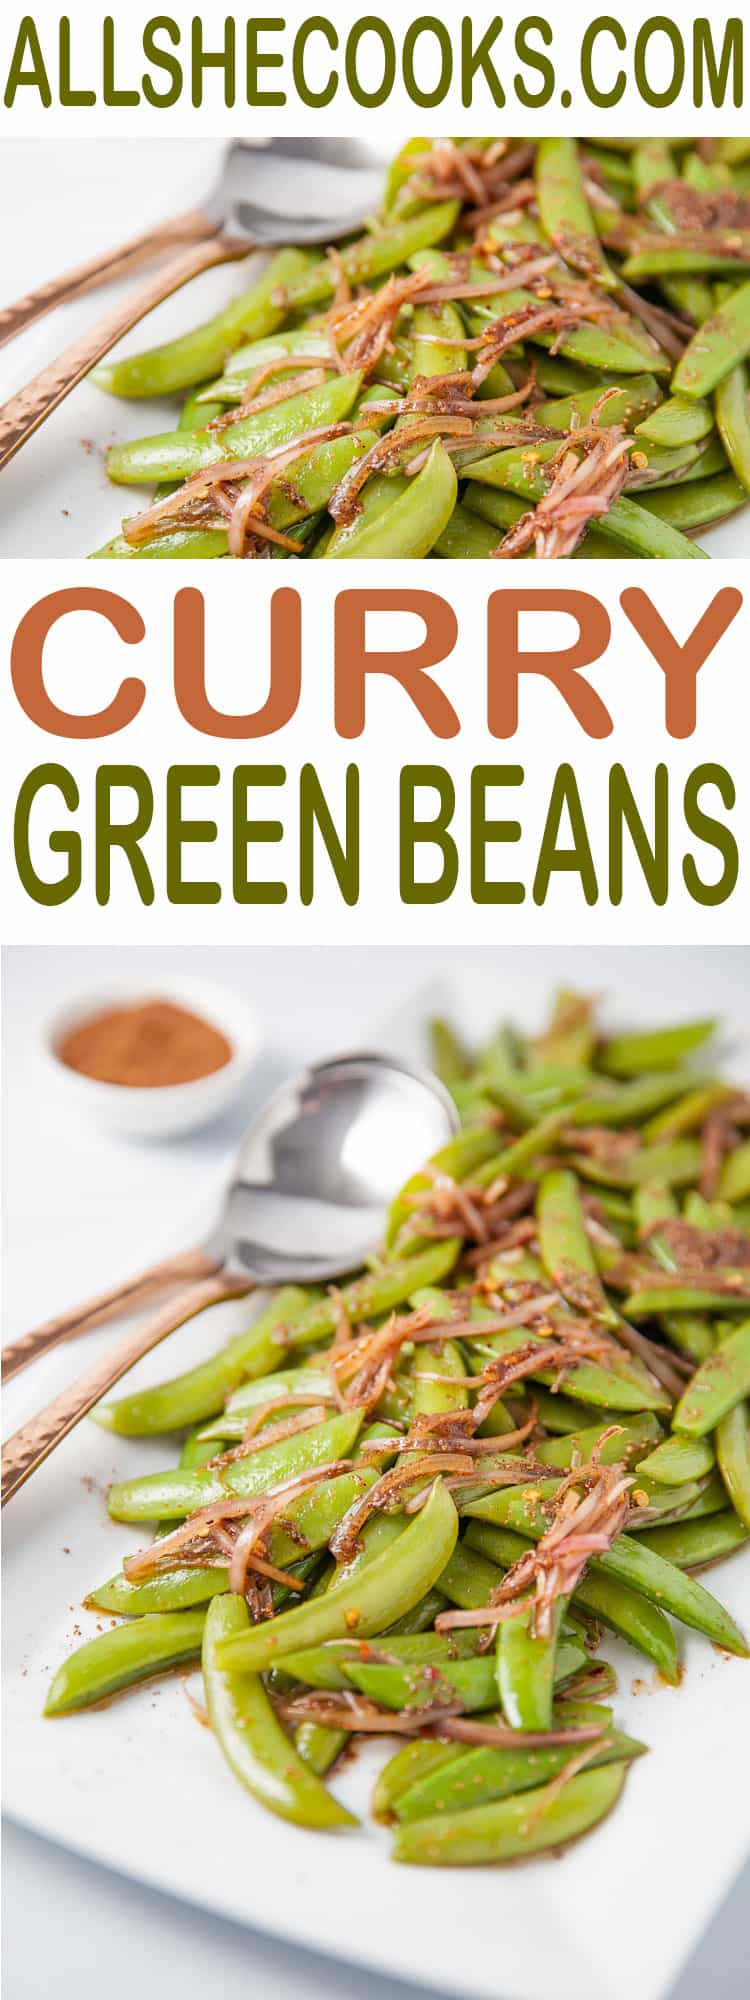 Green Beans with curry make a tasty side dish for Thanksgiving or other meals. Delicious side dish!